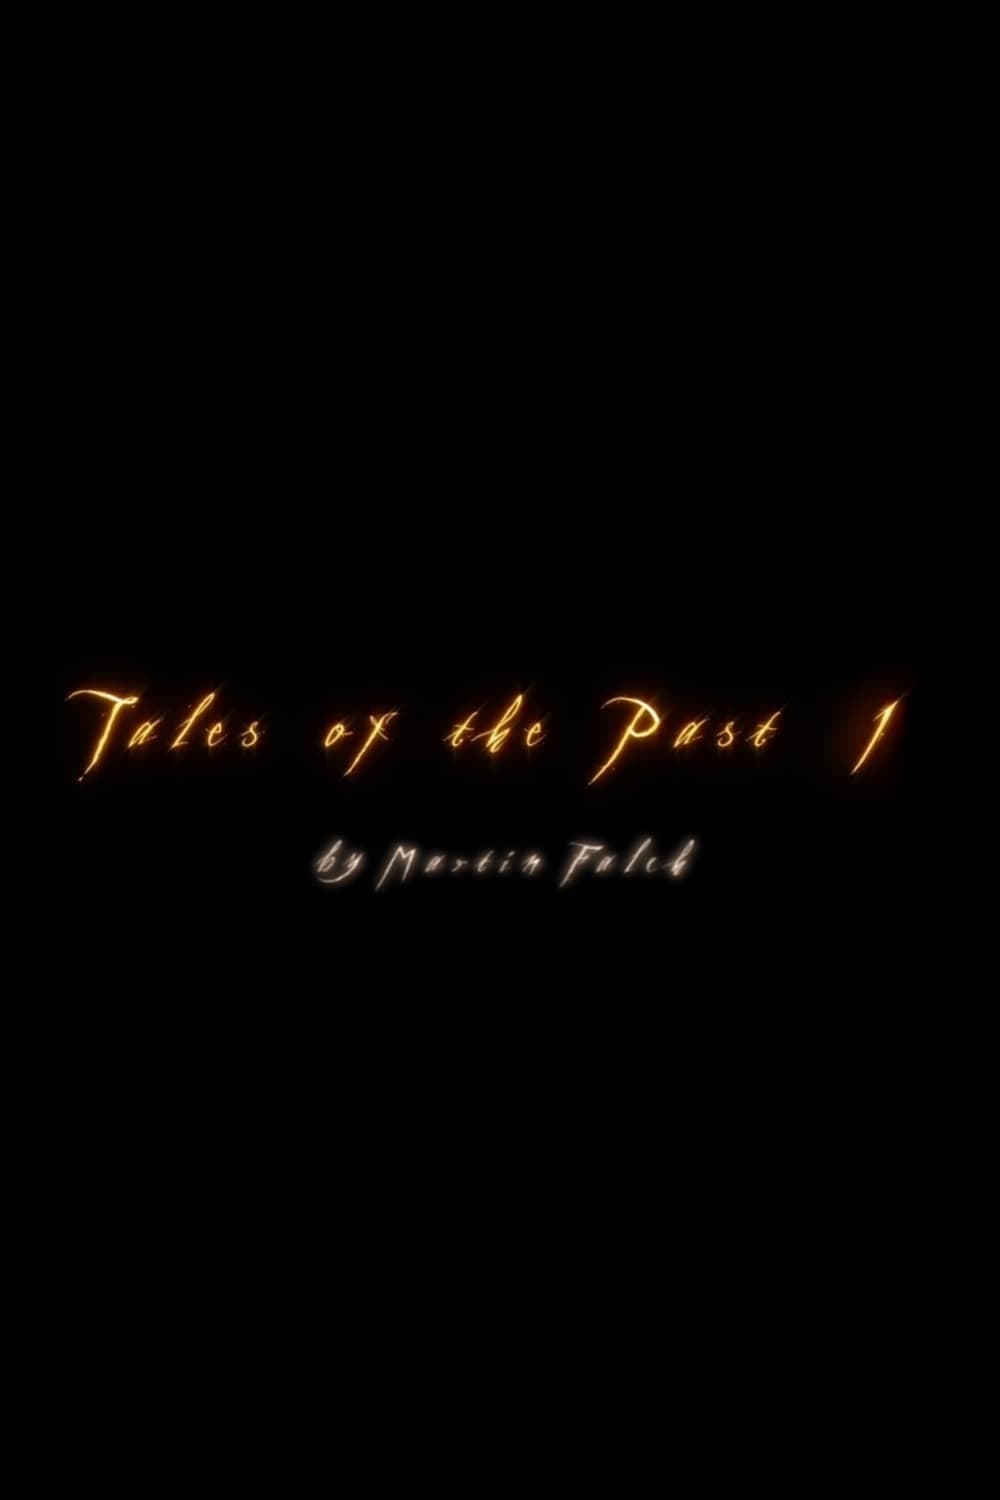 Tales Of The Past 1